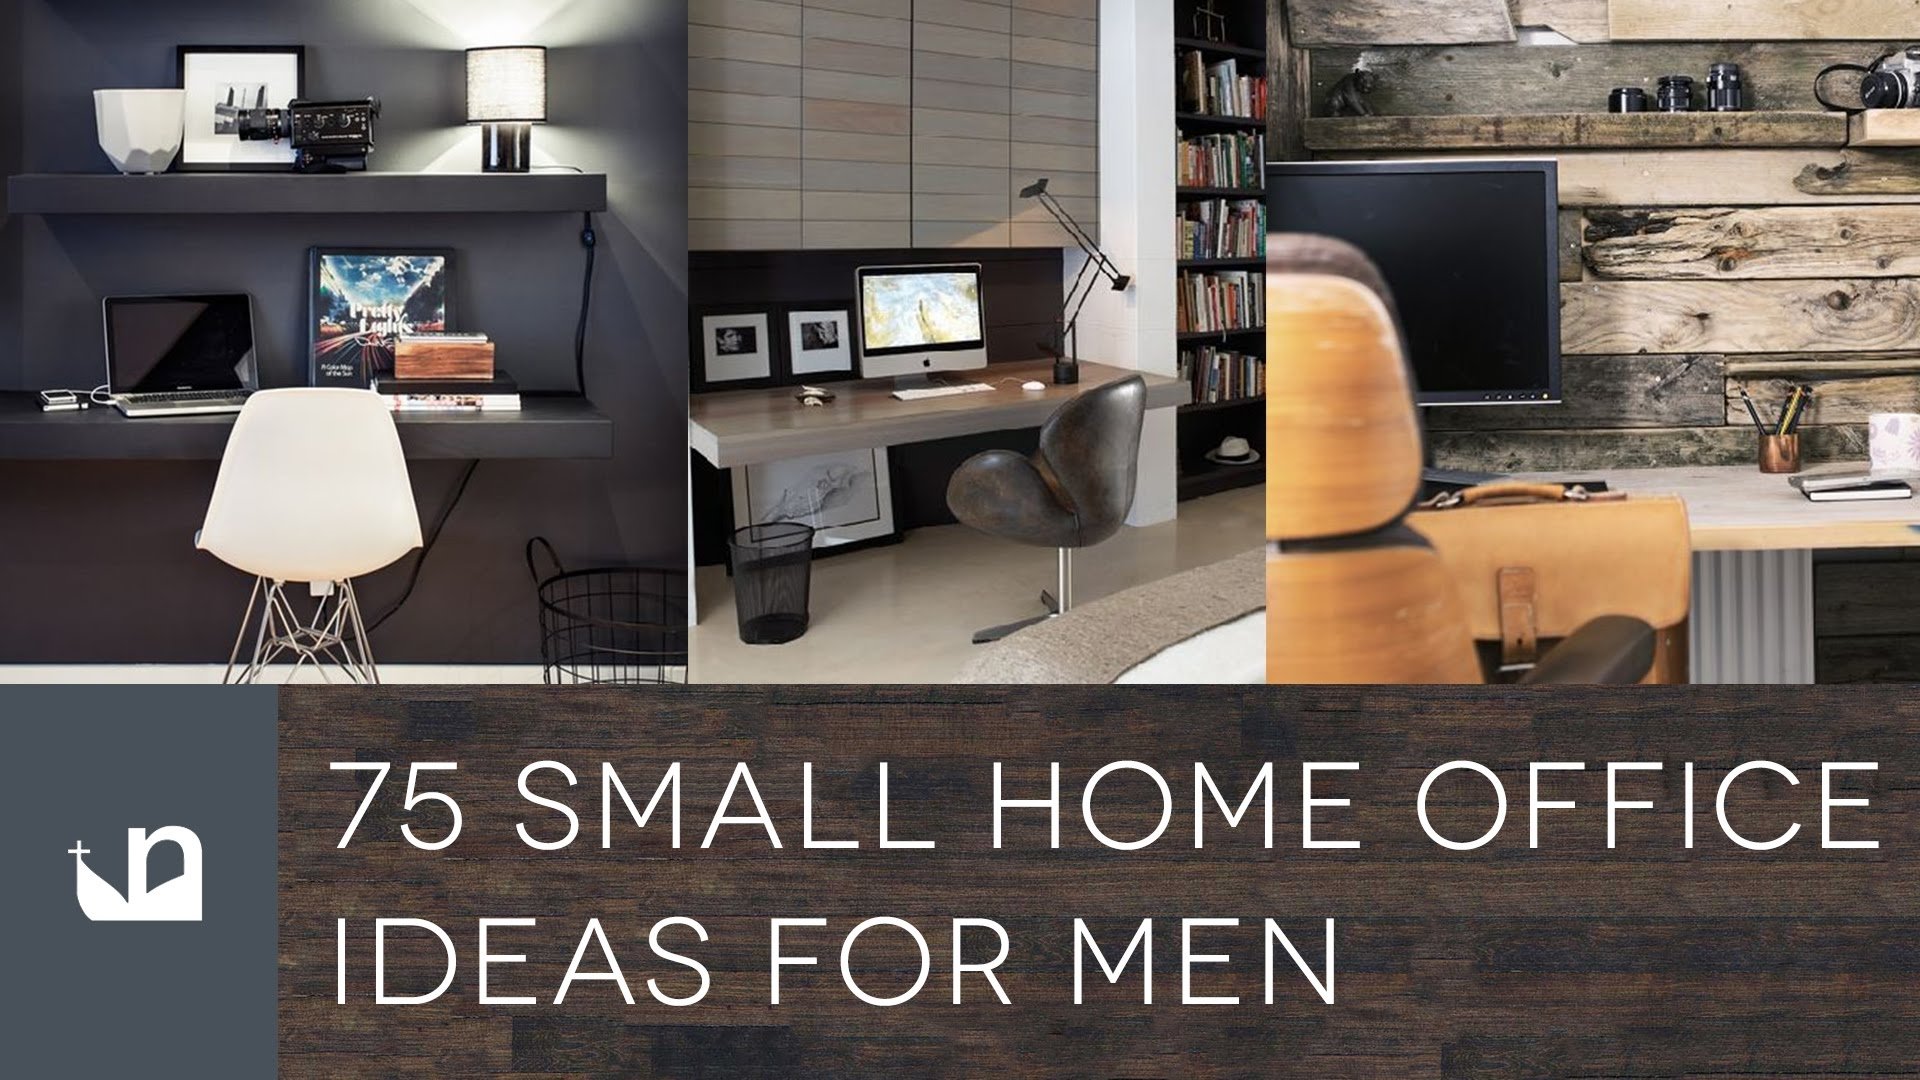 10 Stunning Home Office Ideas For Men 75 small home office ideas for men design inspiration youtube 2022